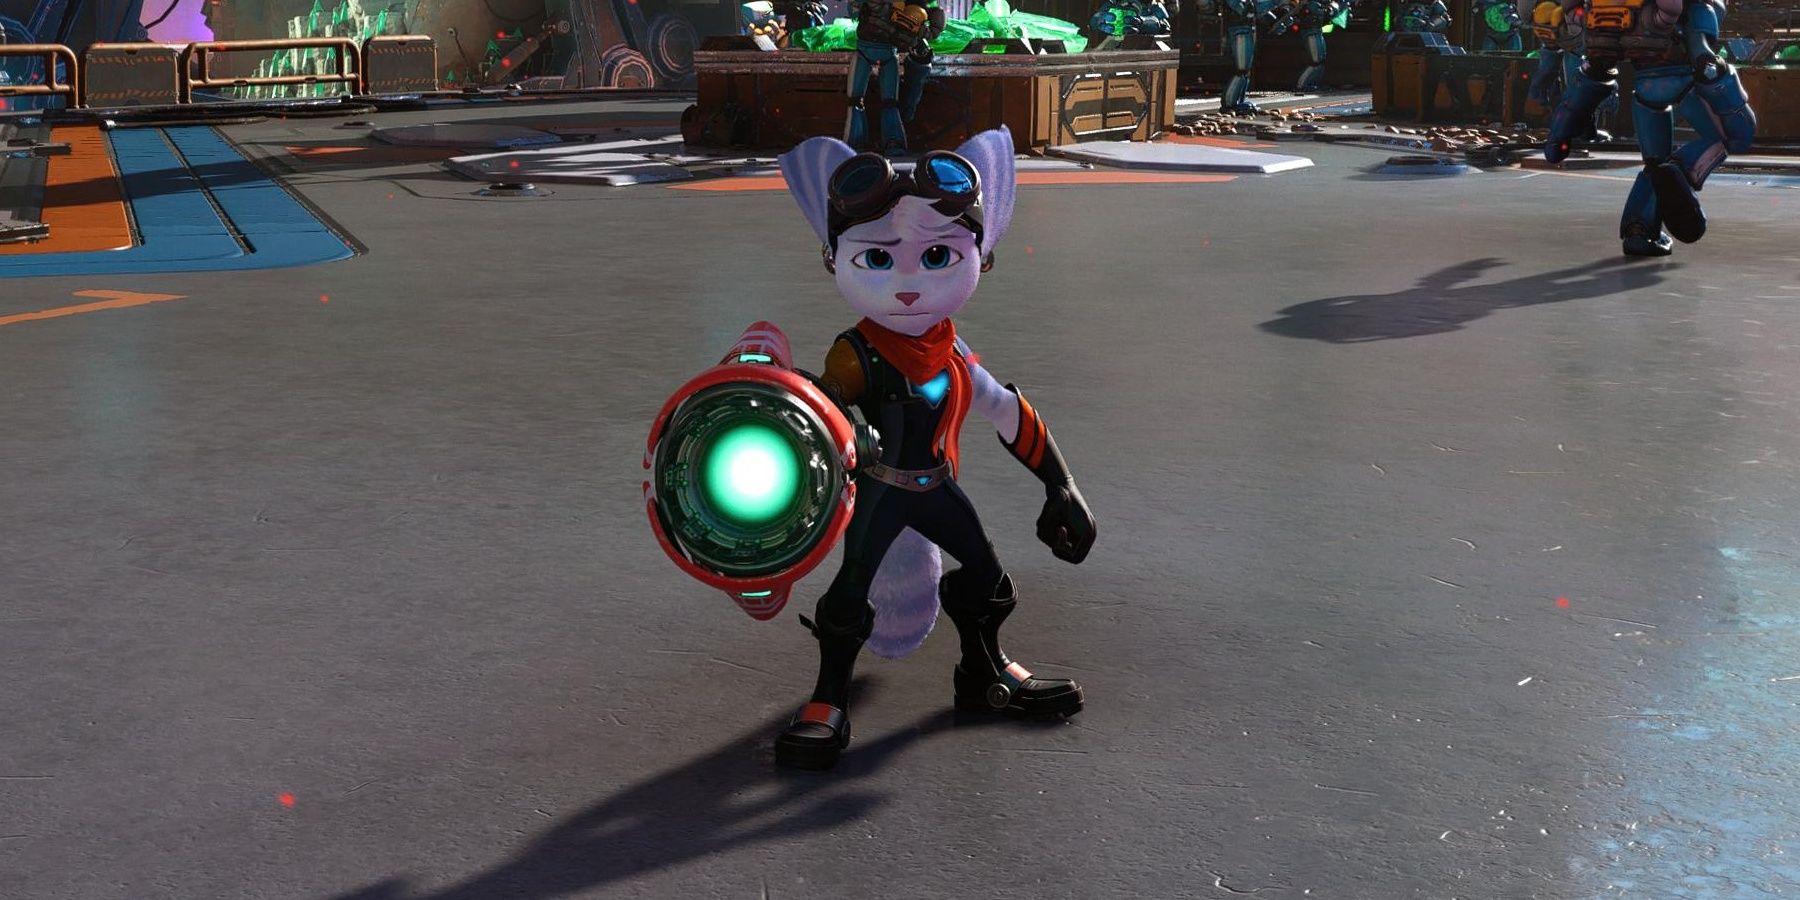 Rivet holding the Negatron Collider weapon in Ratchet and Clank: Rift Apart